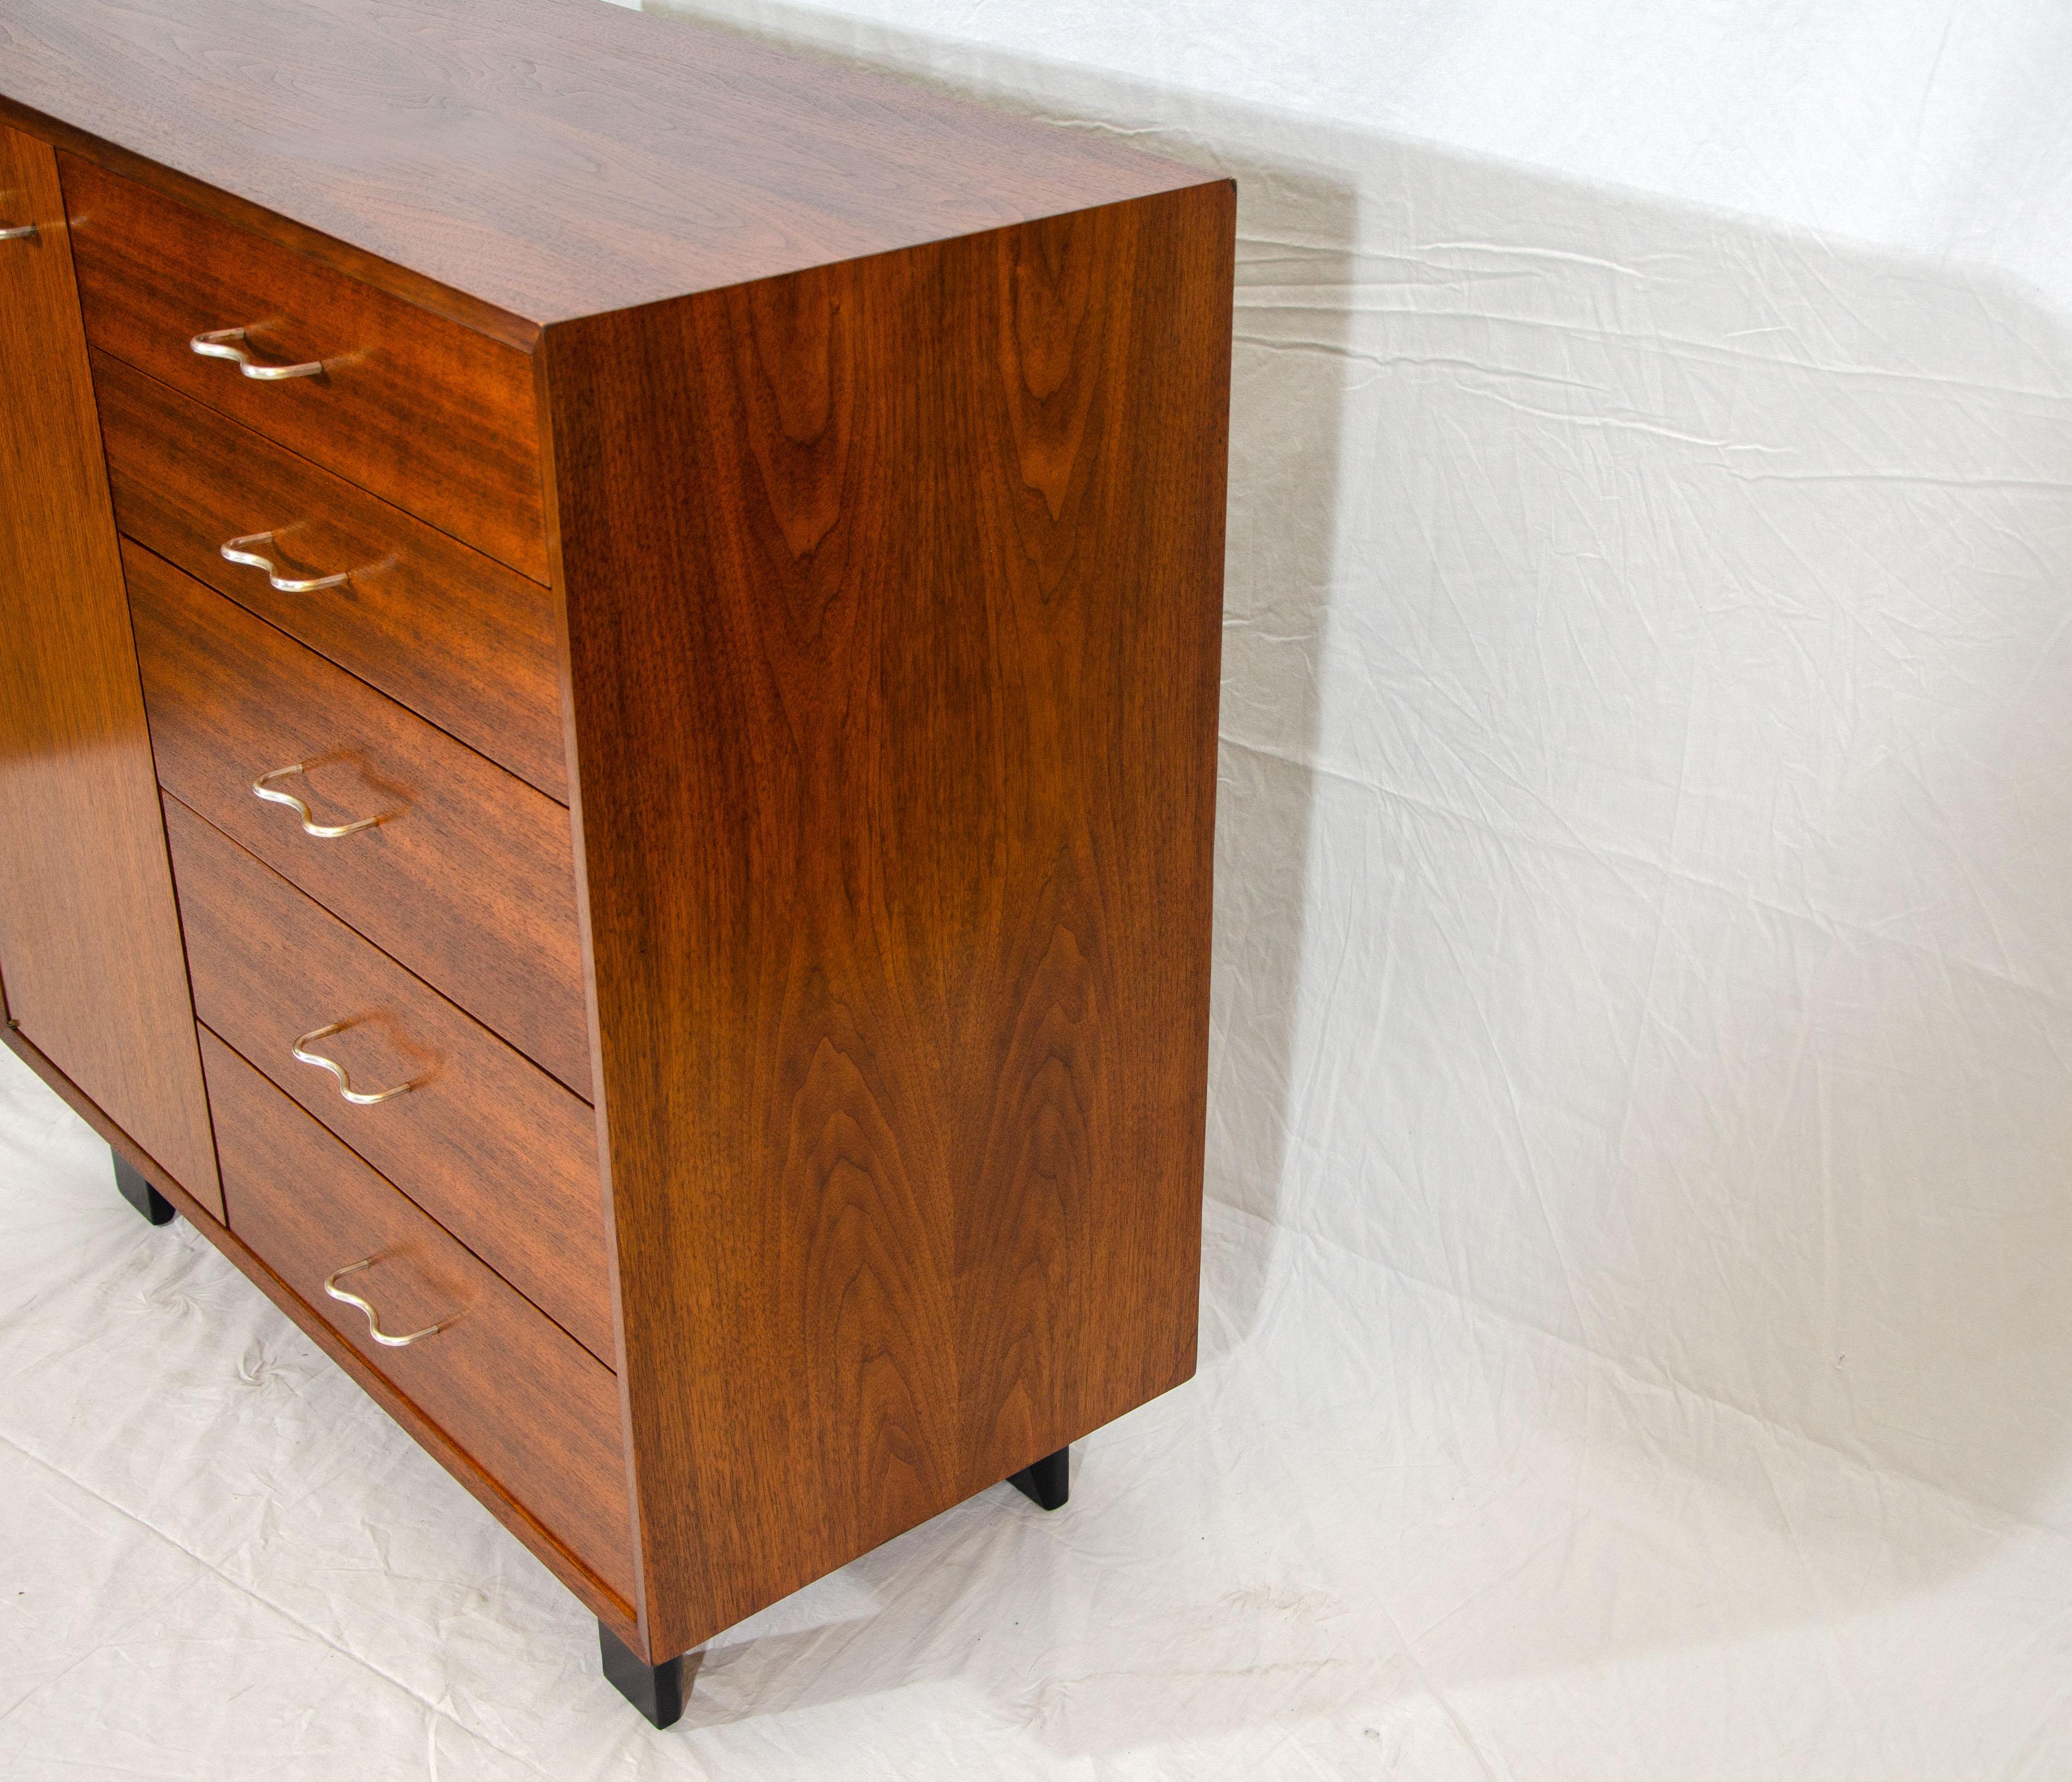 Nice walnut gentleman's chest from the Basic Cabinet Series designed by George Nelson for Herman Miller in 1952. There are five drawers on one side which have interior heights from 4